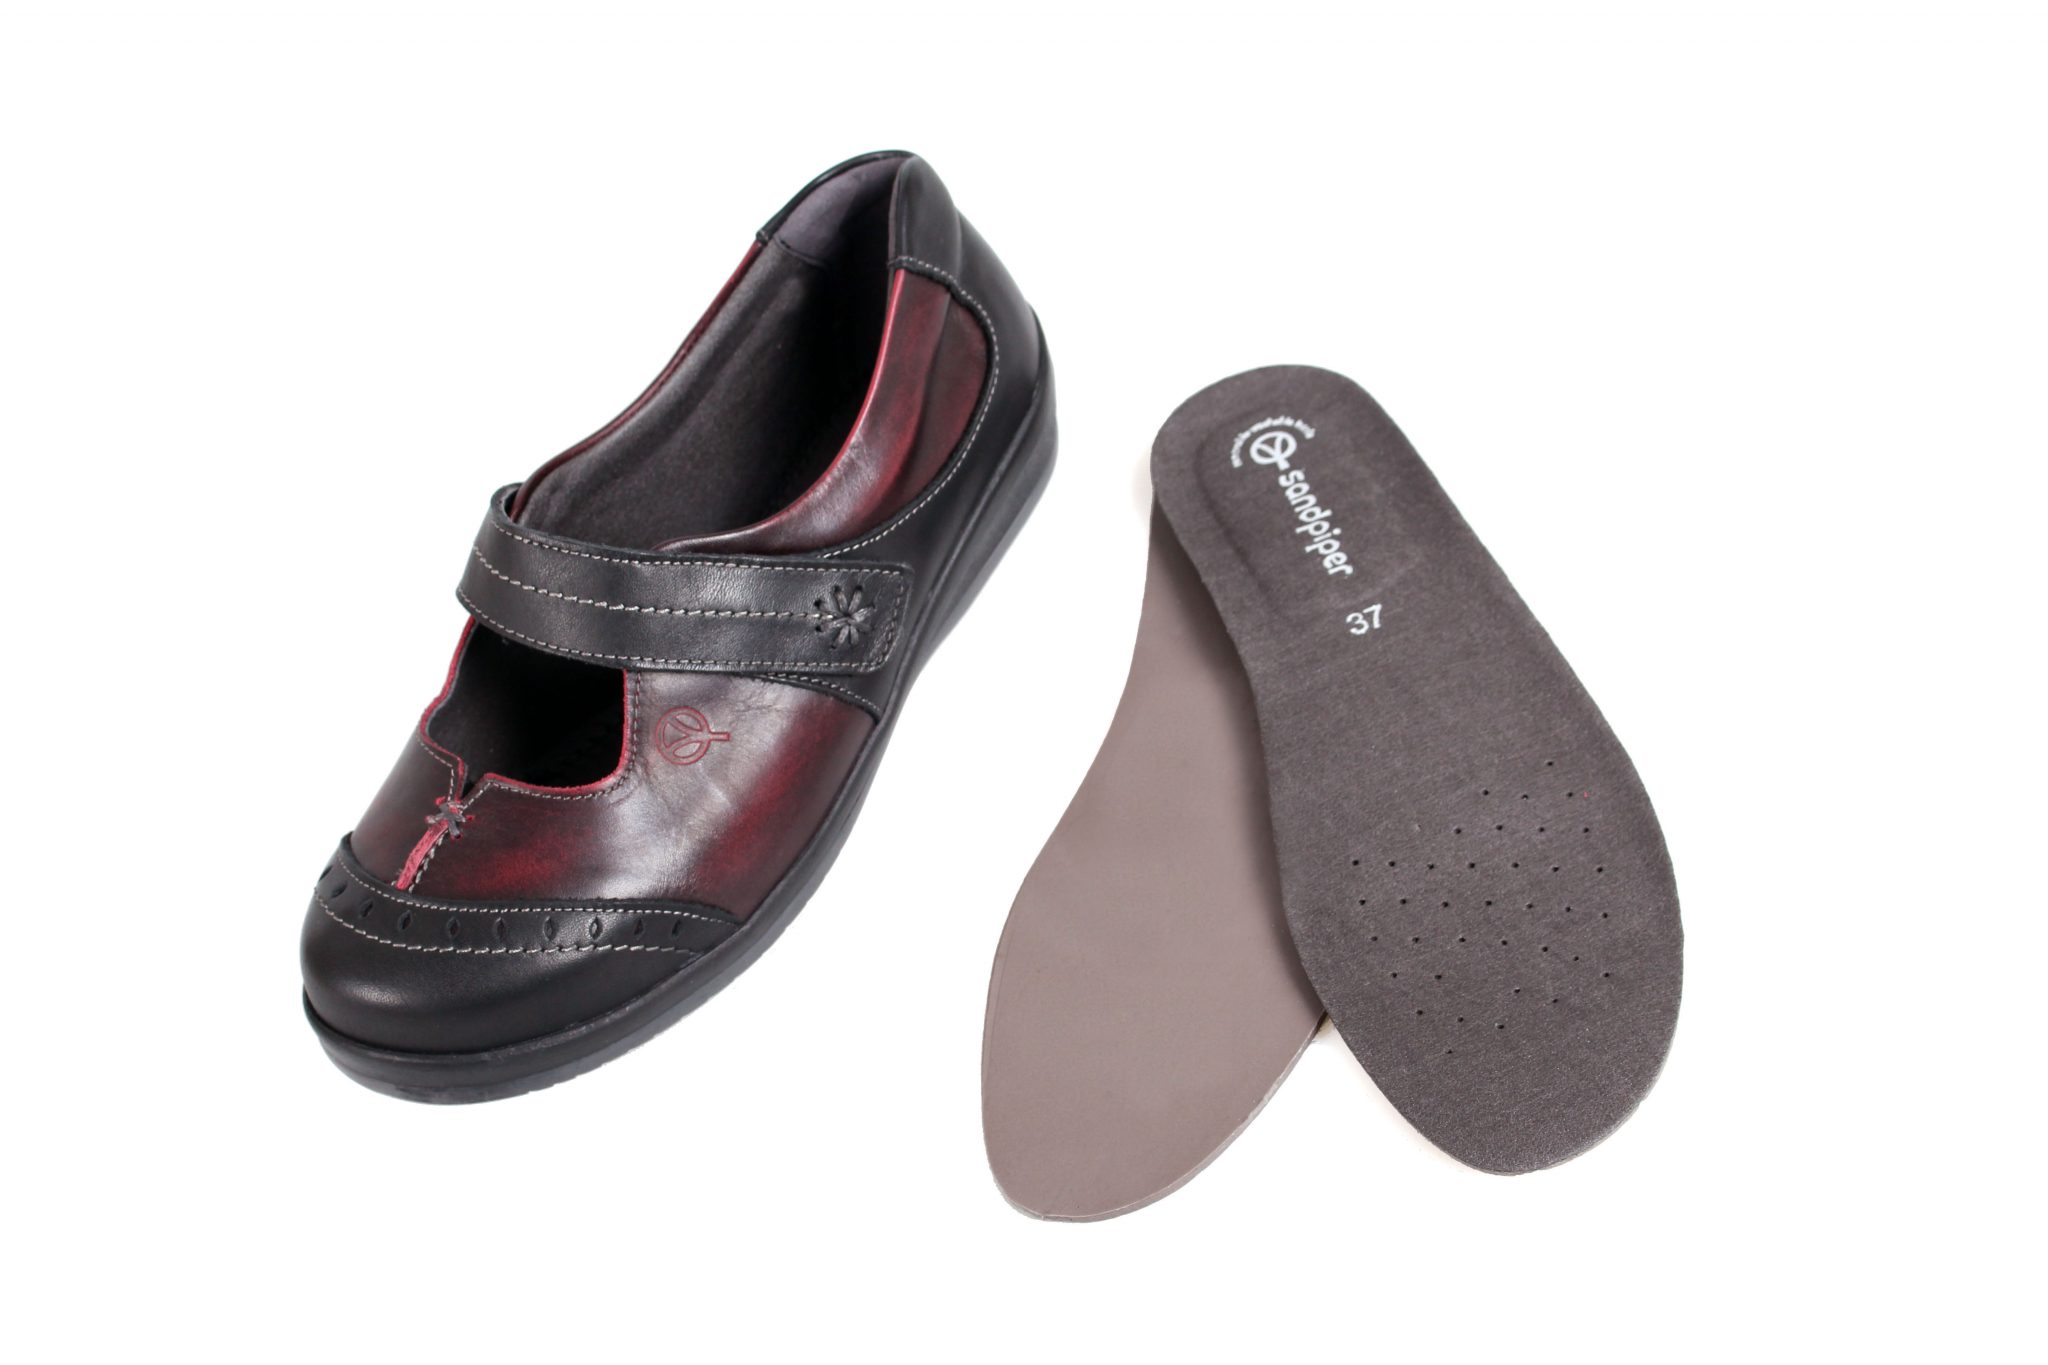 Sandpiper Filton 3in1-insoles ladies wider fitiing shoe